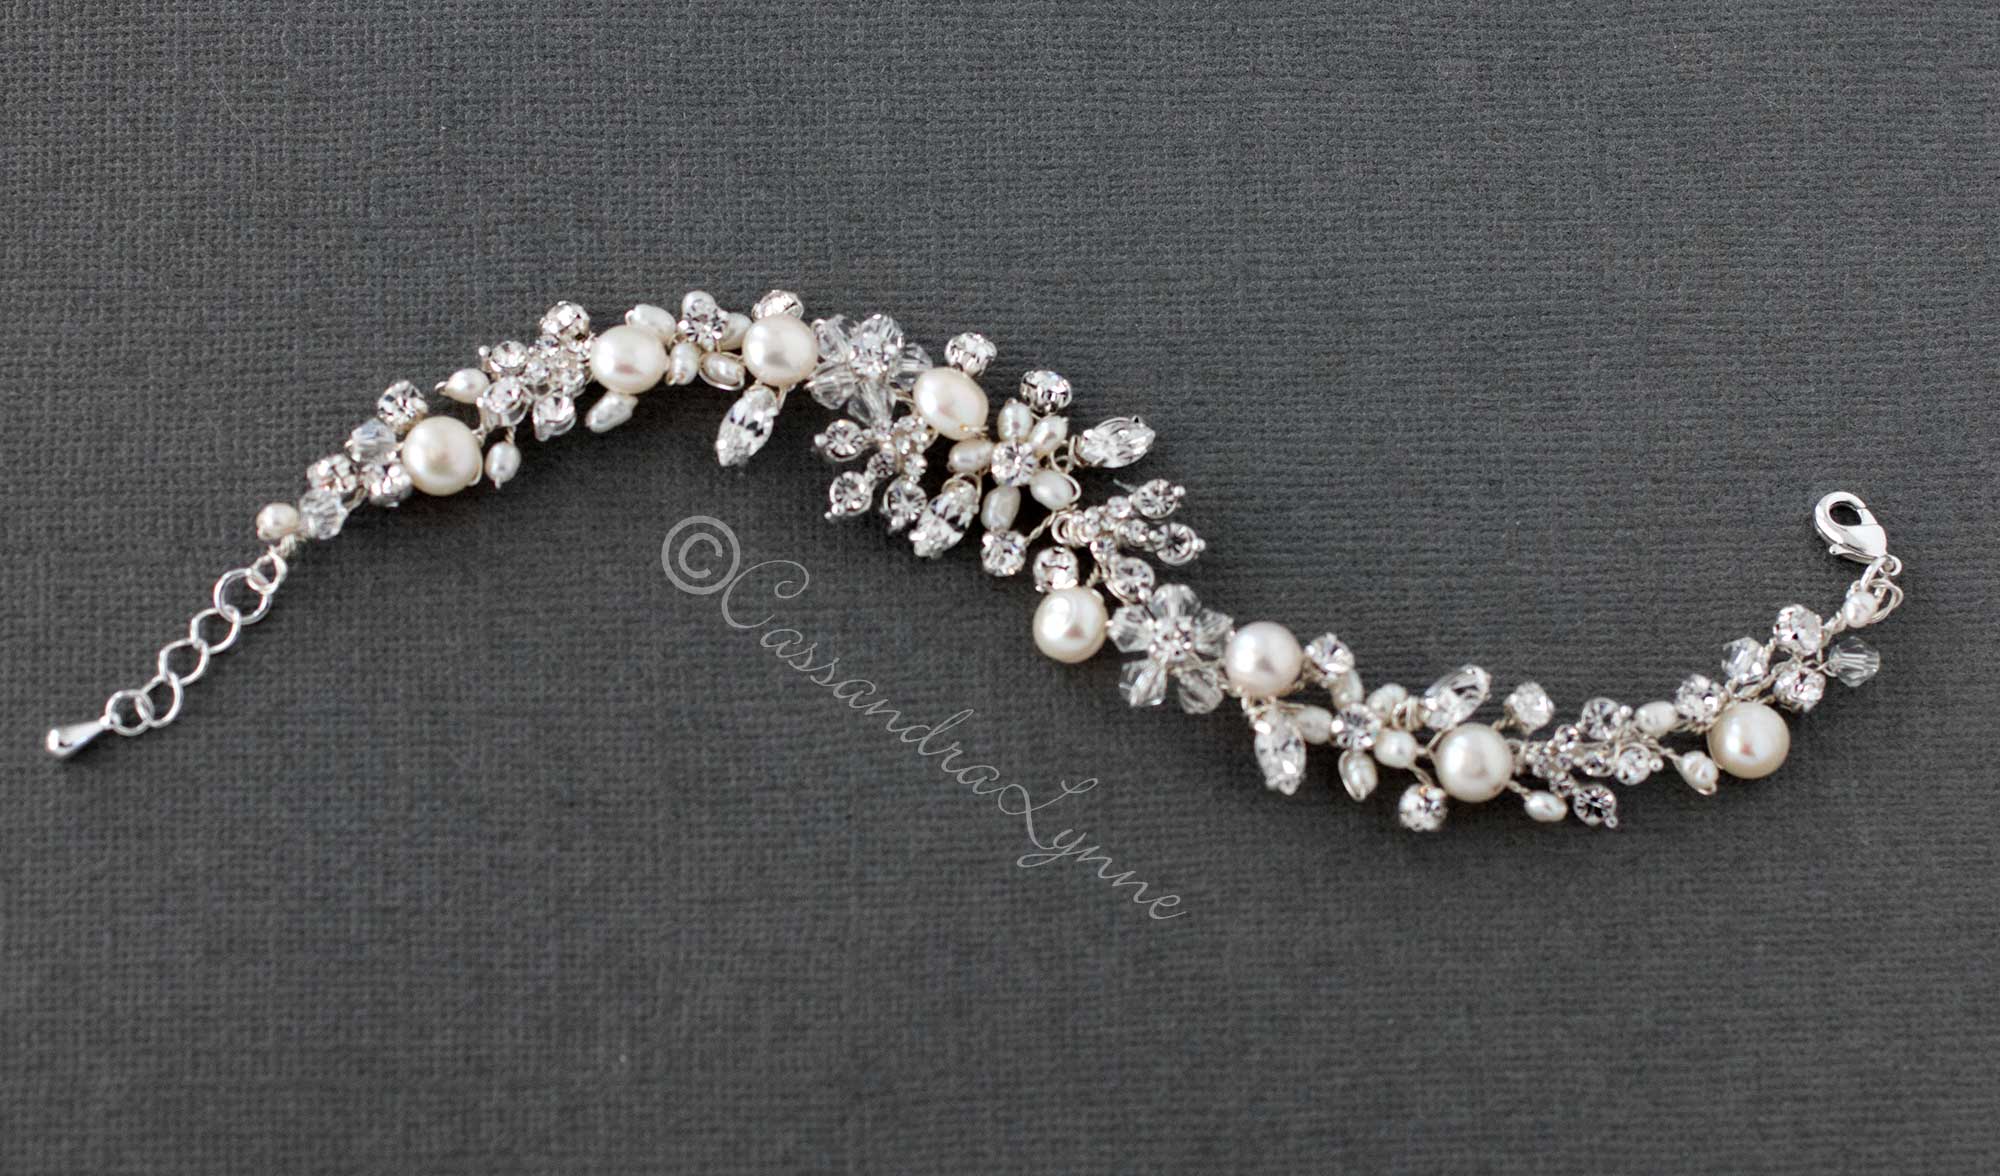 Bracelet with Freshwater Pearls and Crystals - Cassandra Lynne